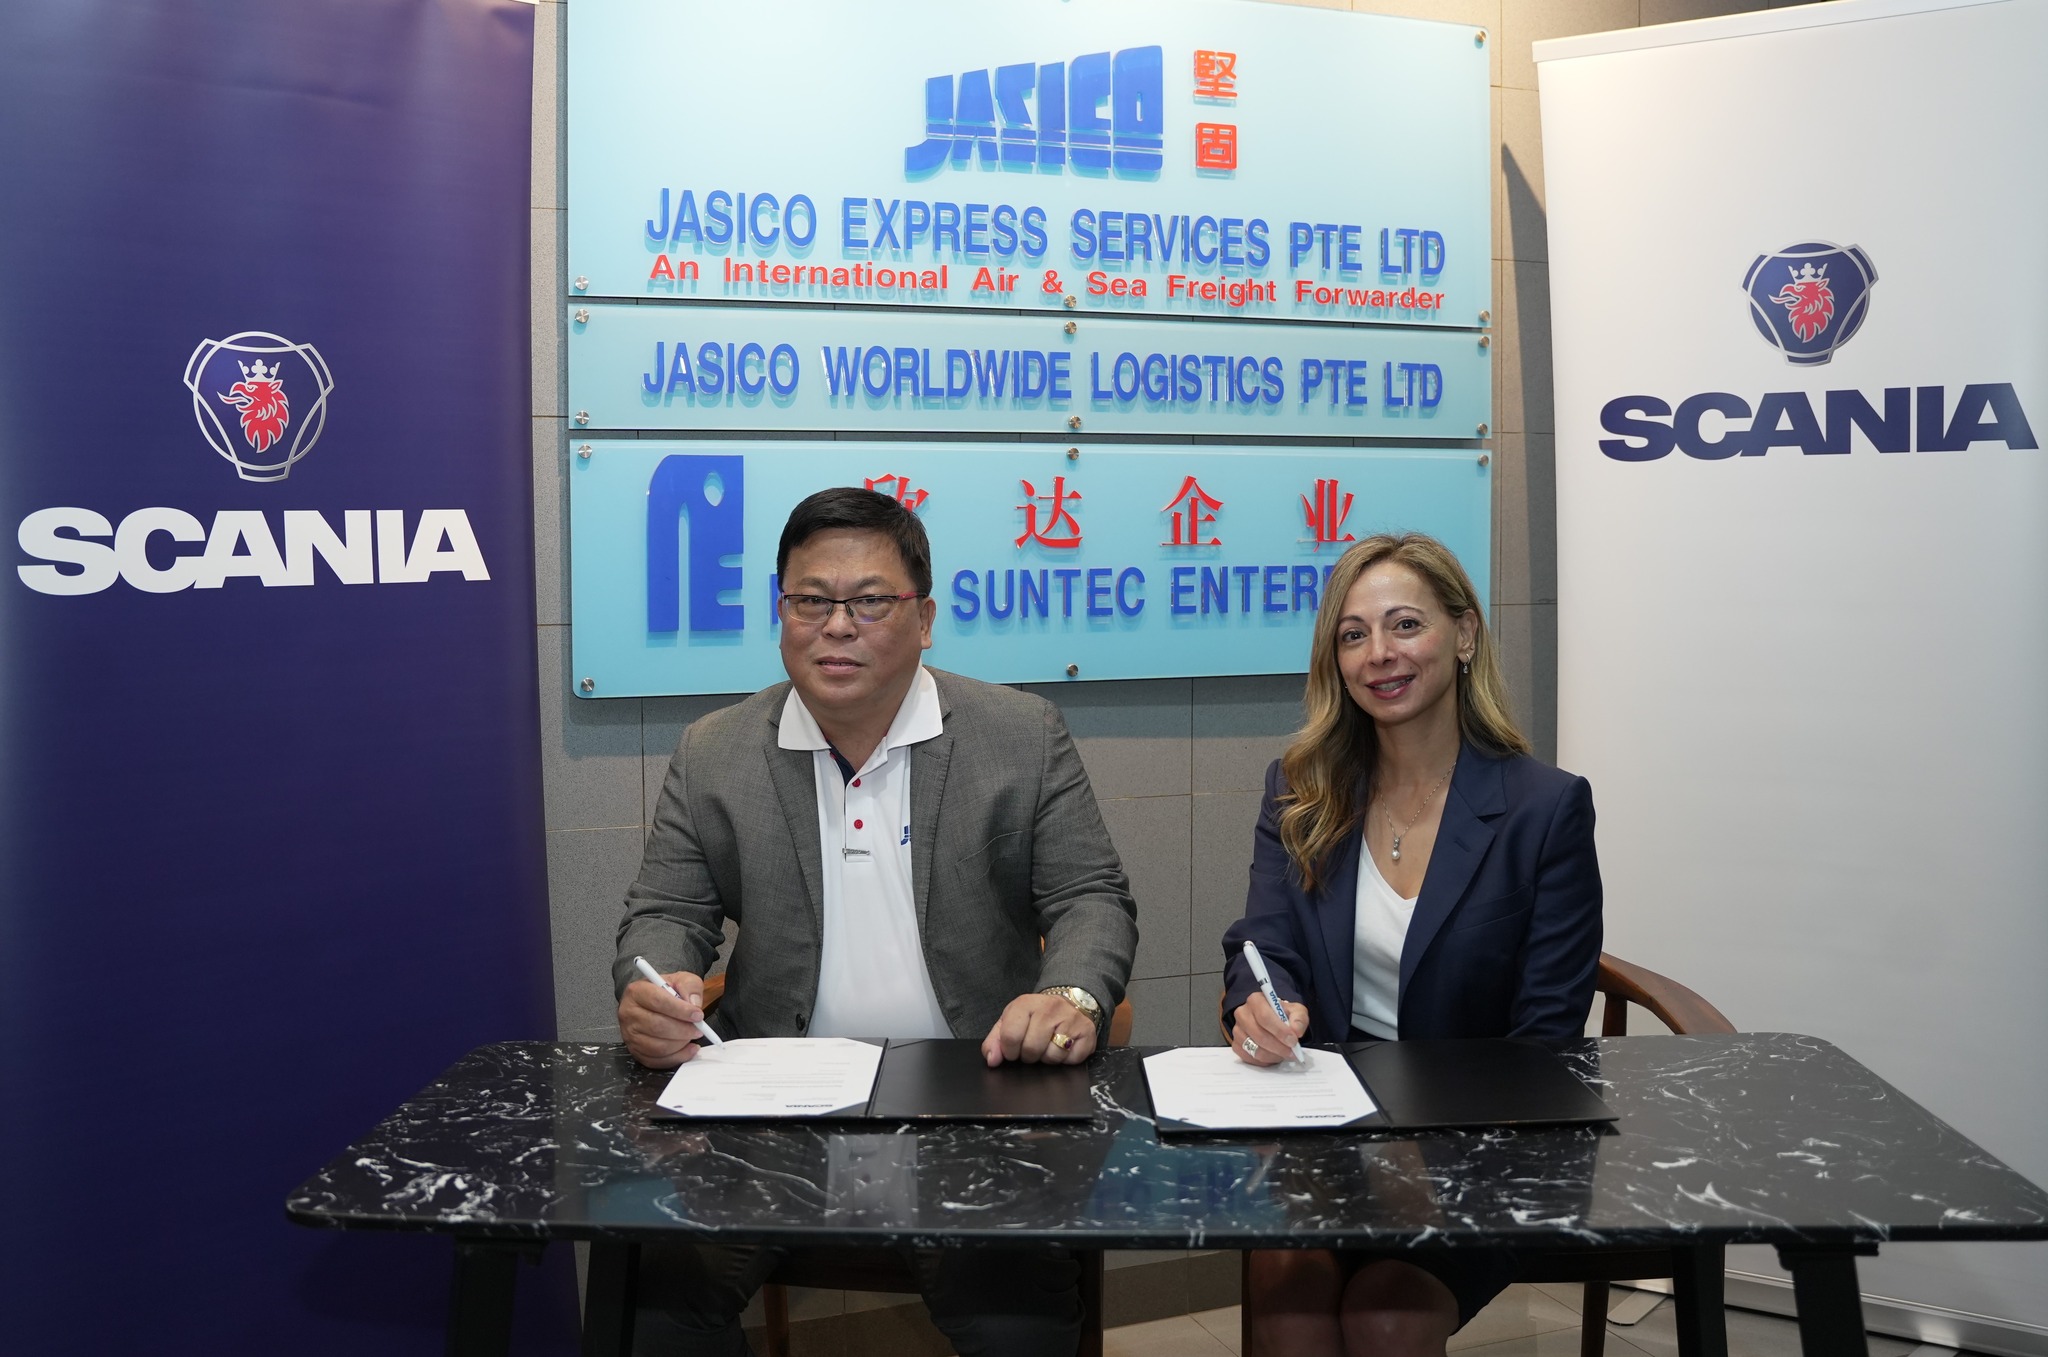 Jasico Express Services Is First To Acquire The Scania Battery Electric Truck For Singapore’s Logistics Sector service-post-image